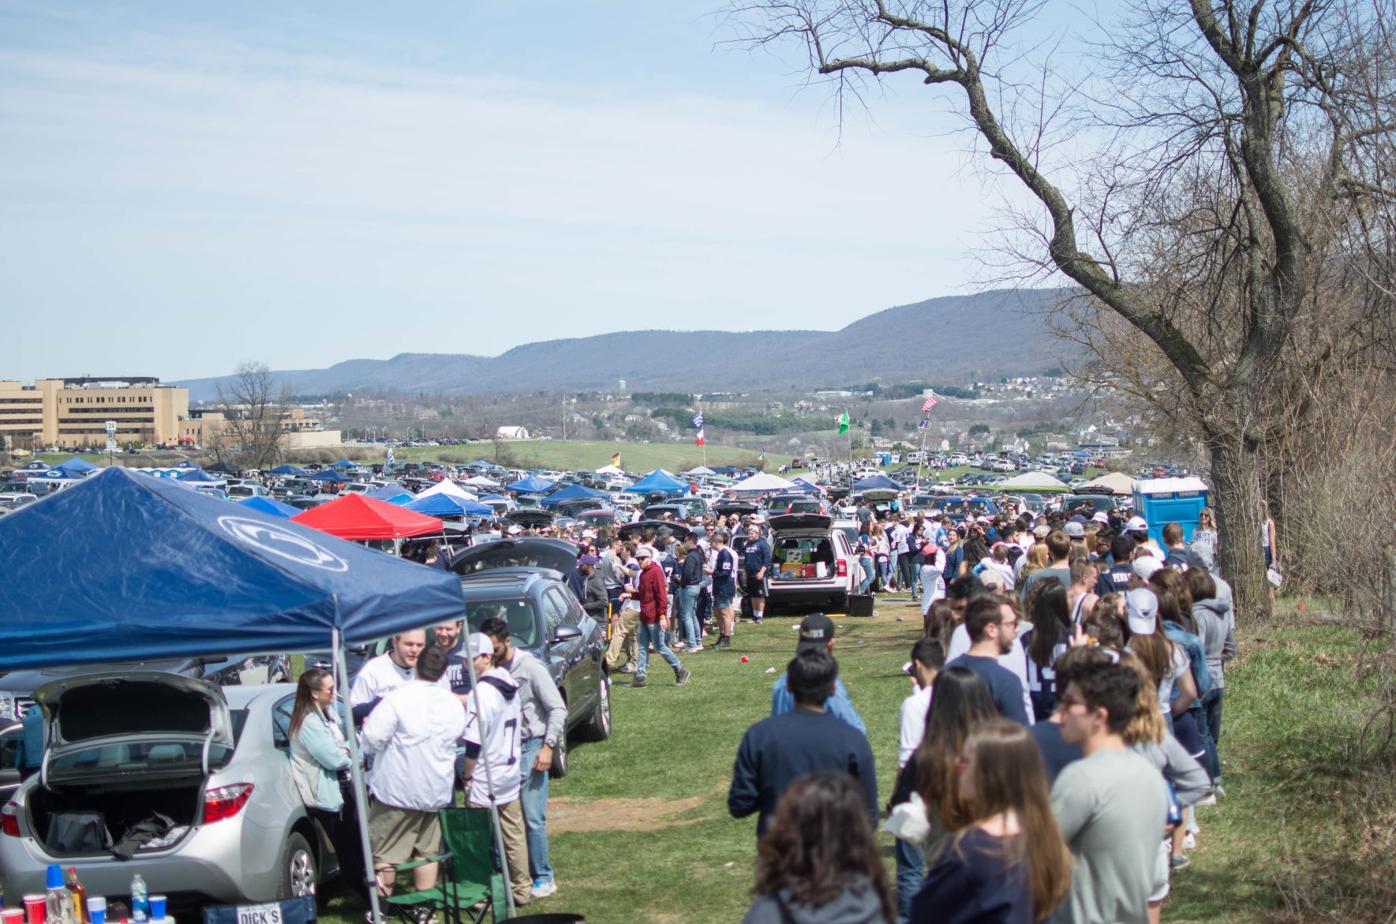 What you need to know for tailgating at Penn State